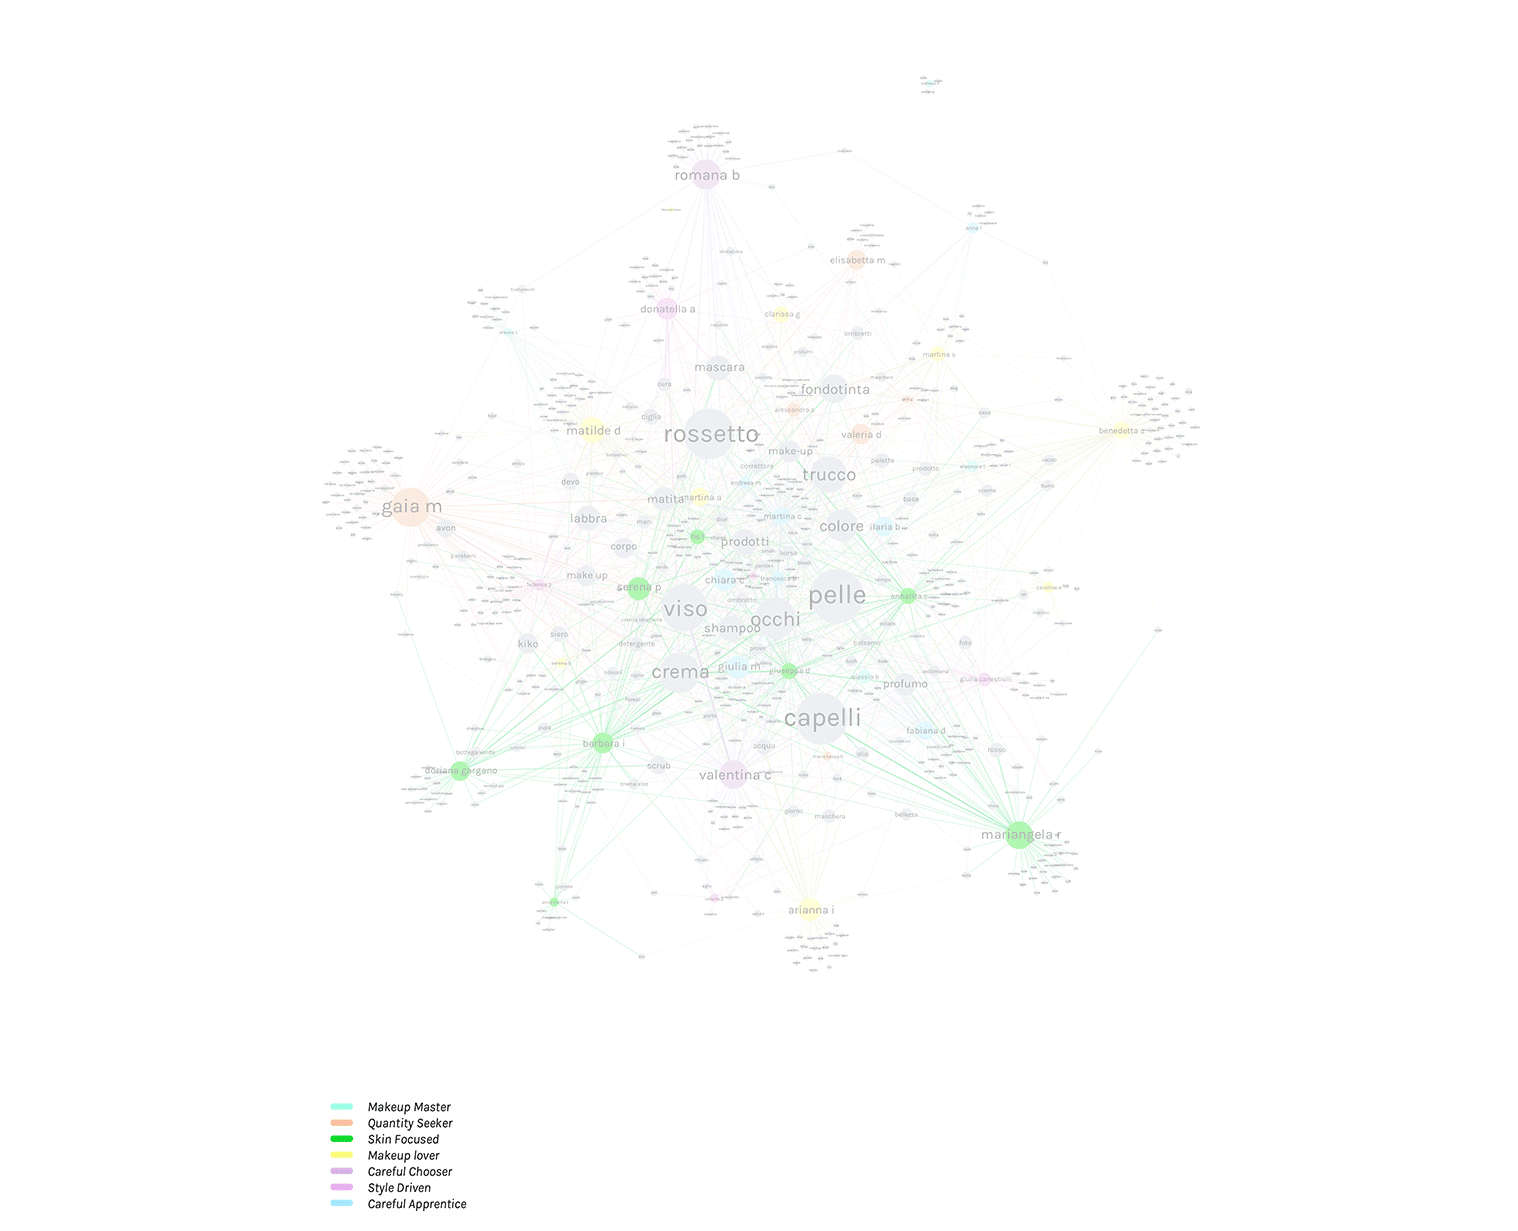 Network of relations between participants and the word they used the most